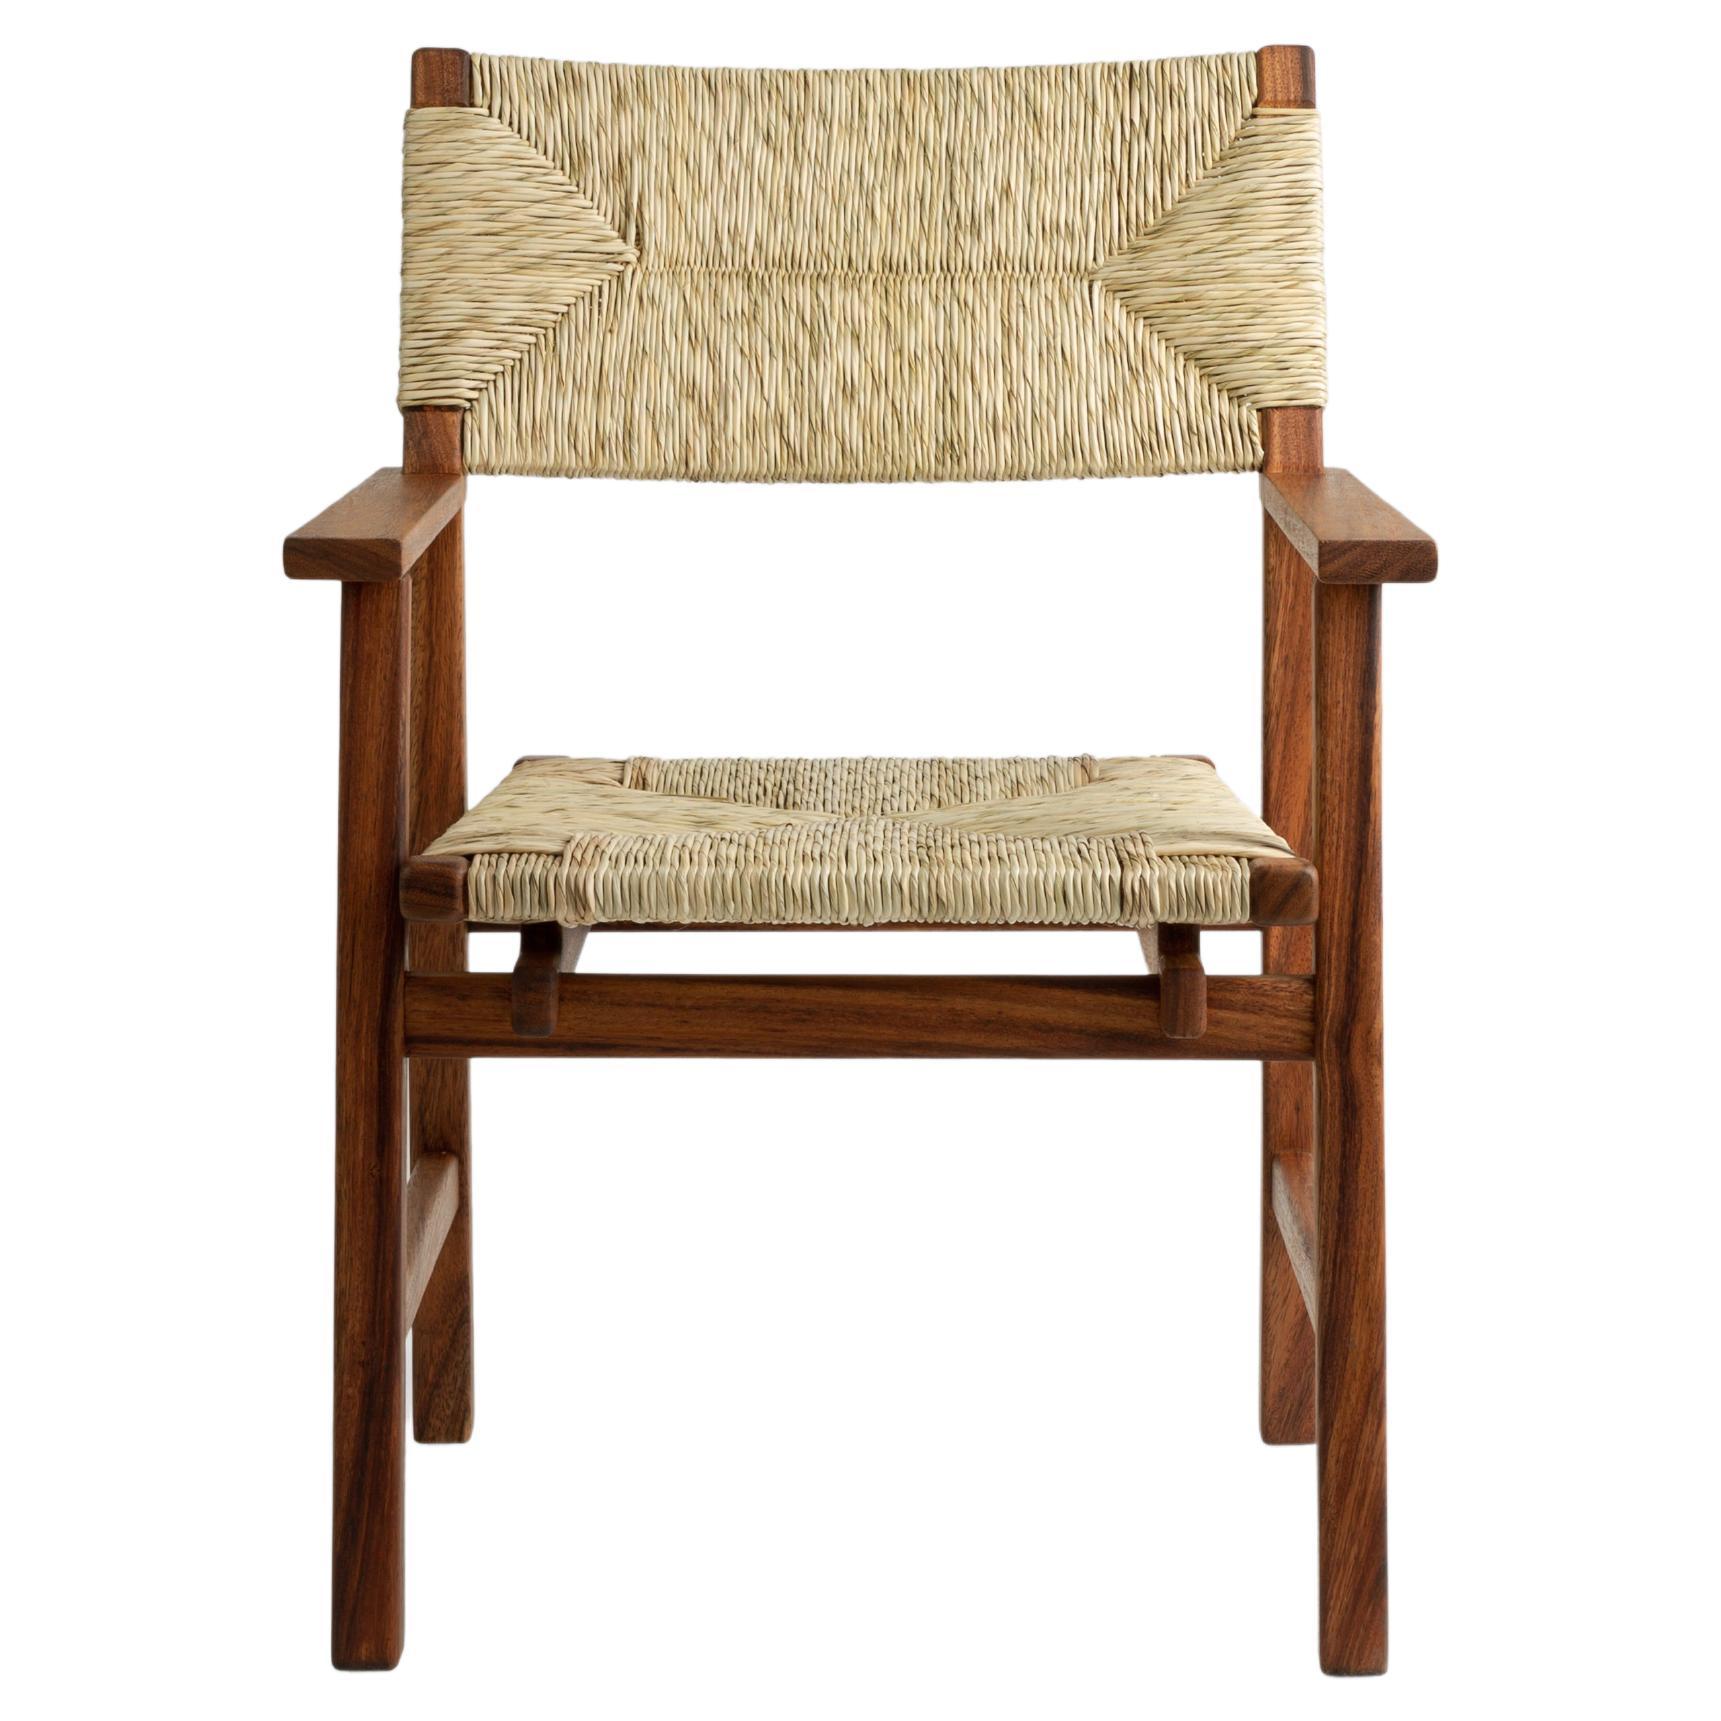 Customizable Modern Dining Armchair Lago, Solid wood, handcrafted natural fiber